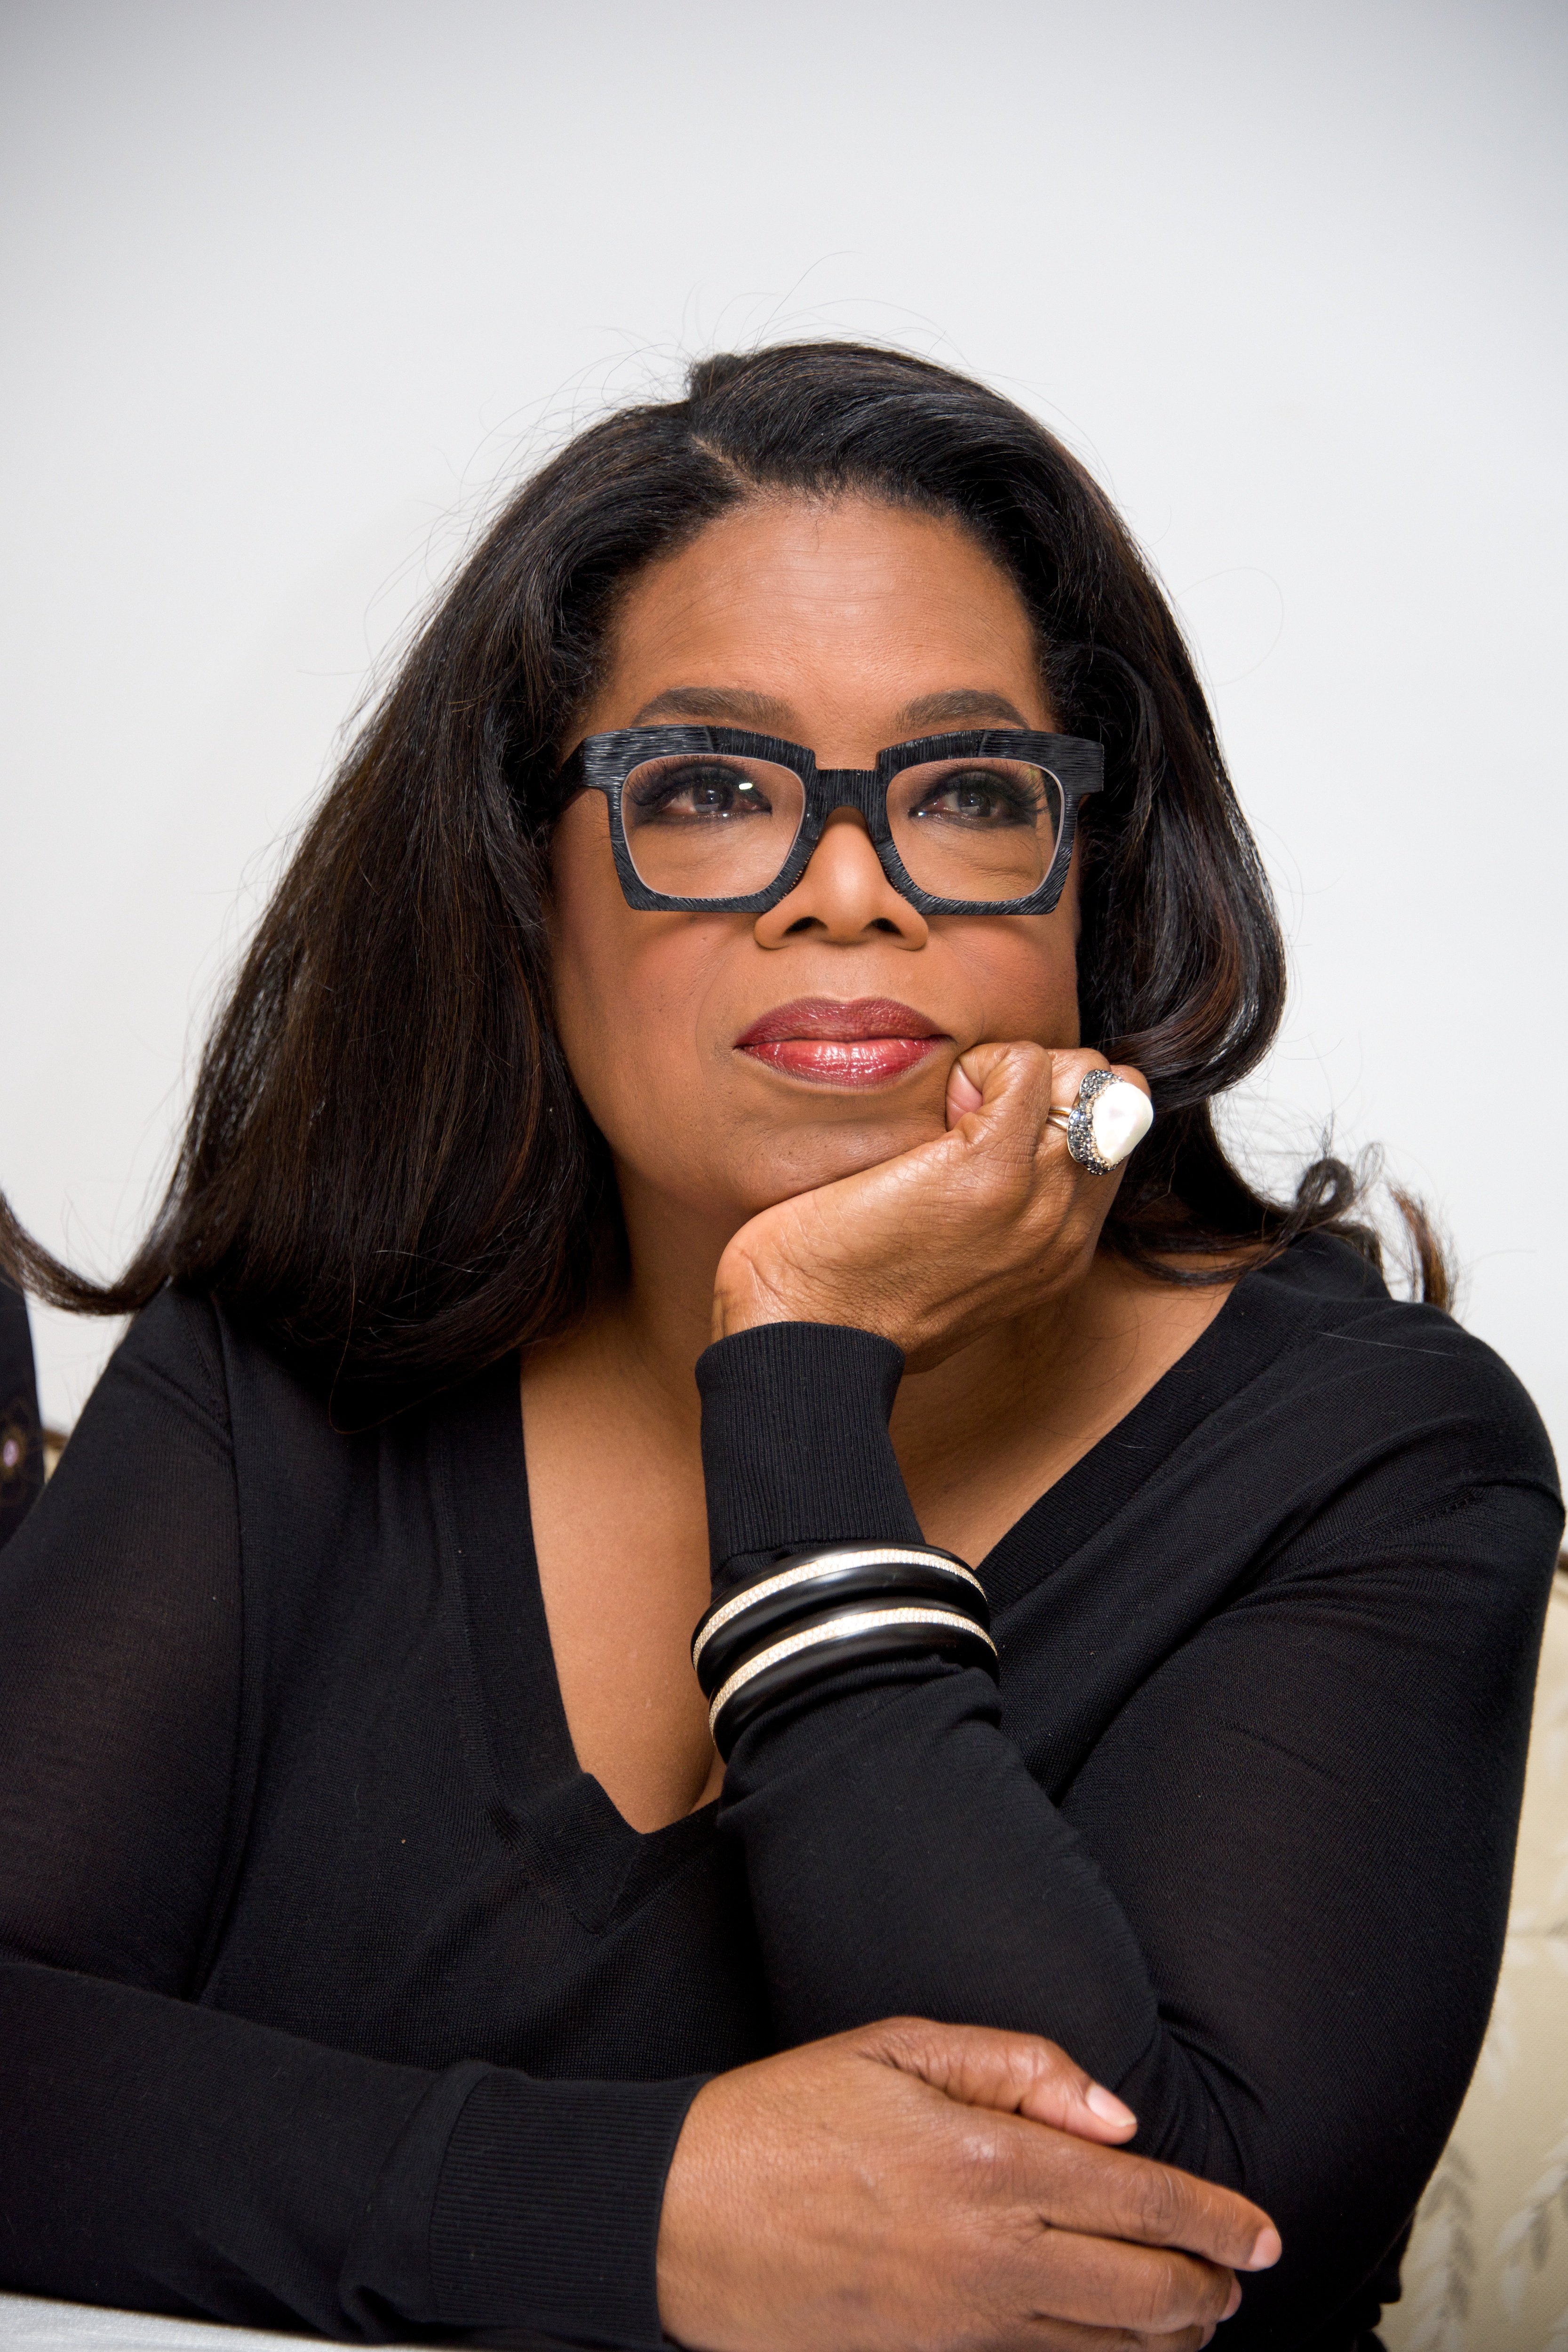 Media mogul Oprah Winfrey at the "Greenleaf" Press Conference held at the Four Seasons Hotel on September 26, 2016 in Beverly Hills, California. | Source: Getty Images